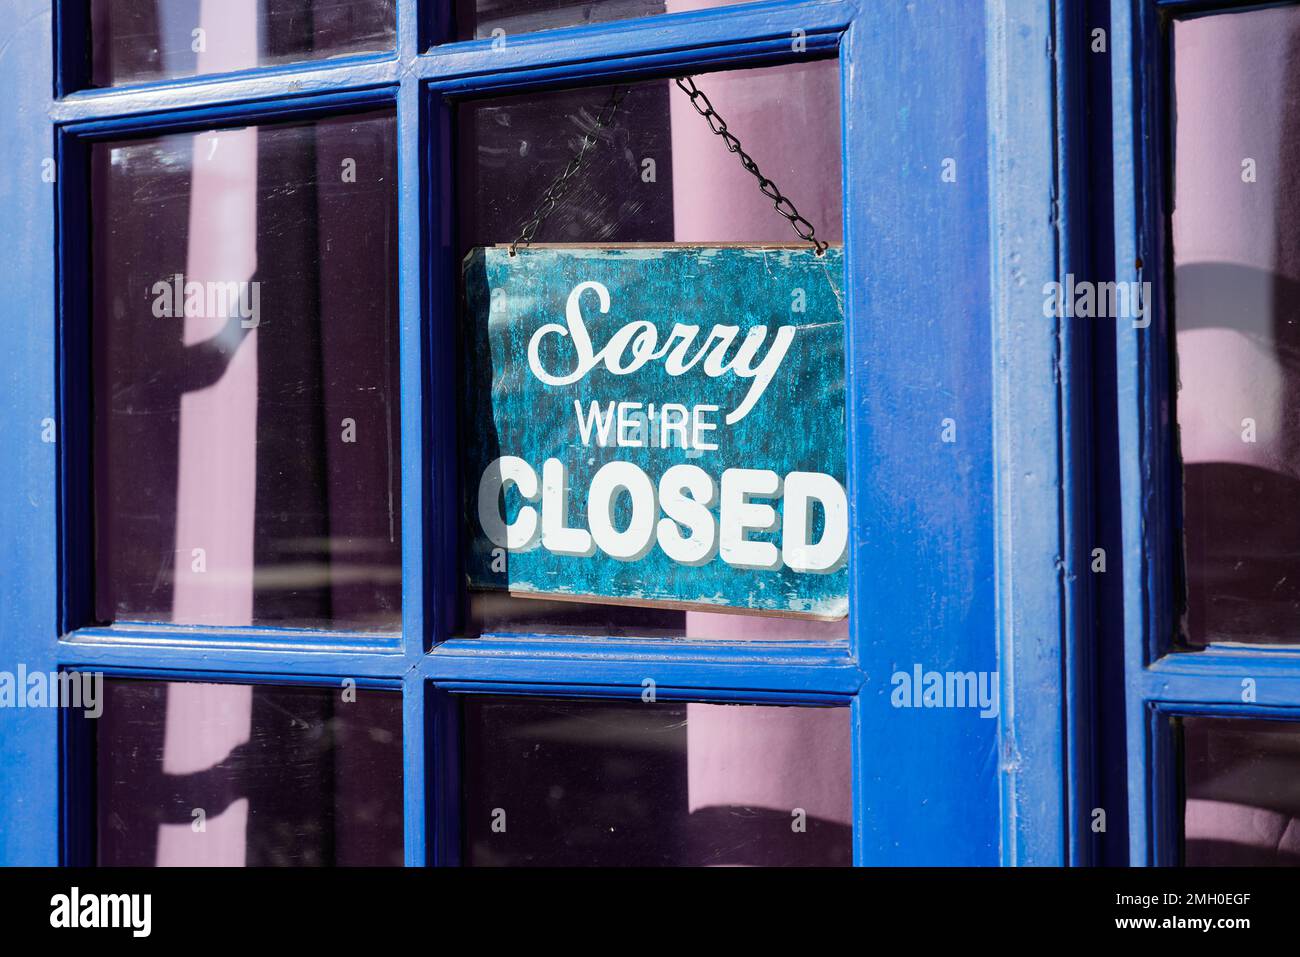 windows vintage shop sign saying sorry we are closed Stock Photo